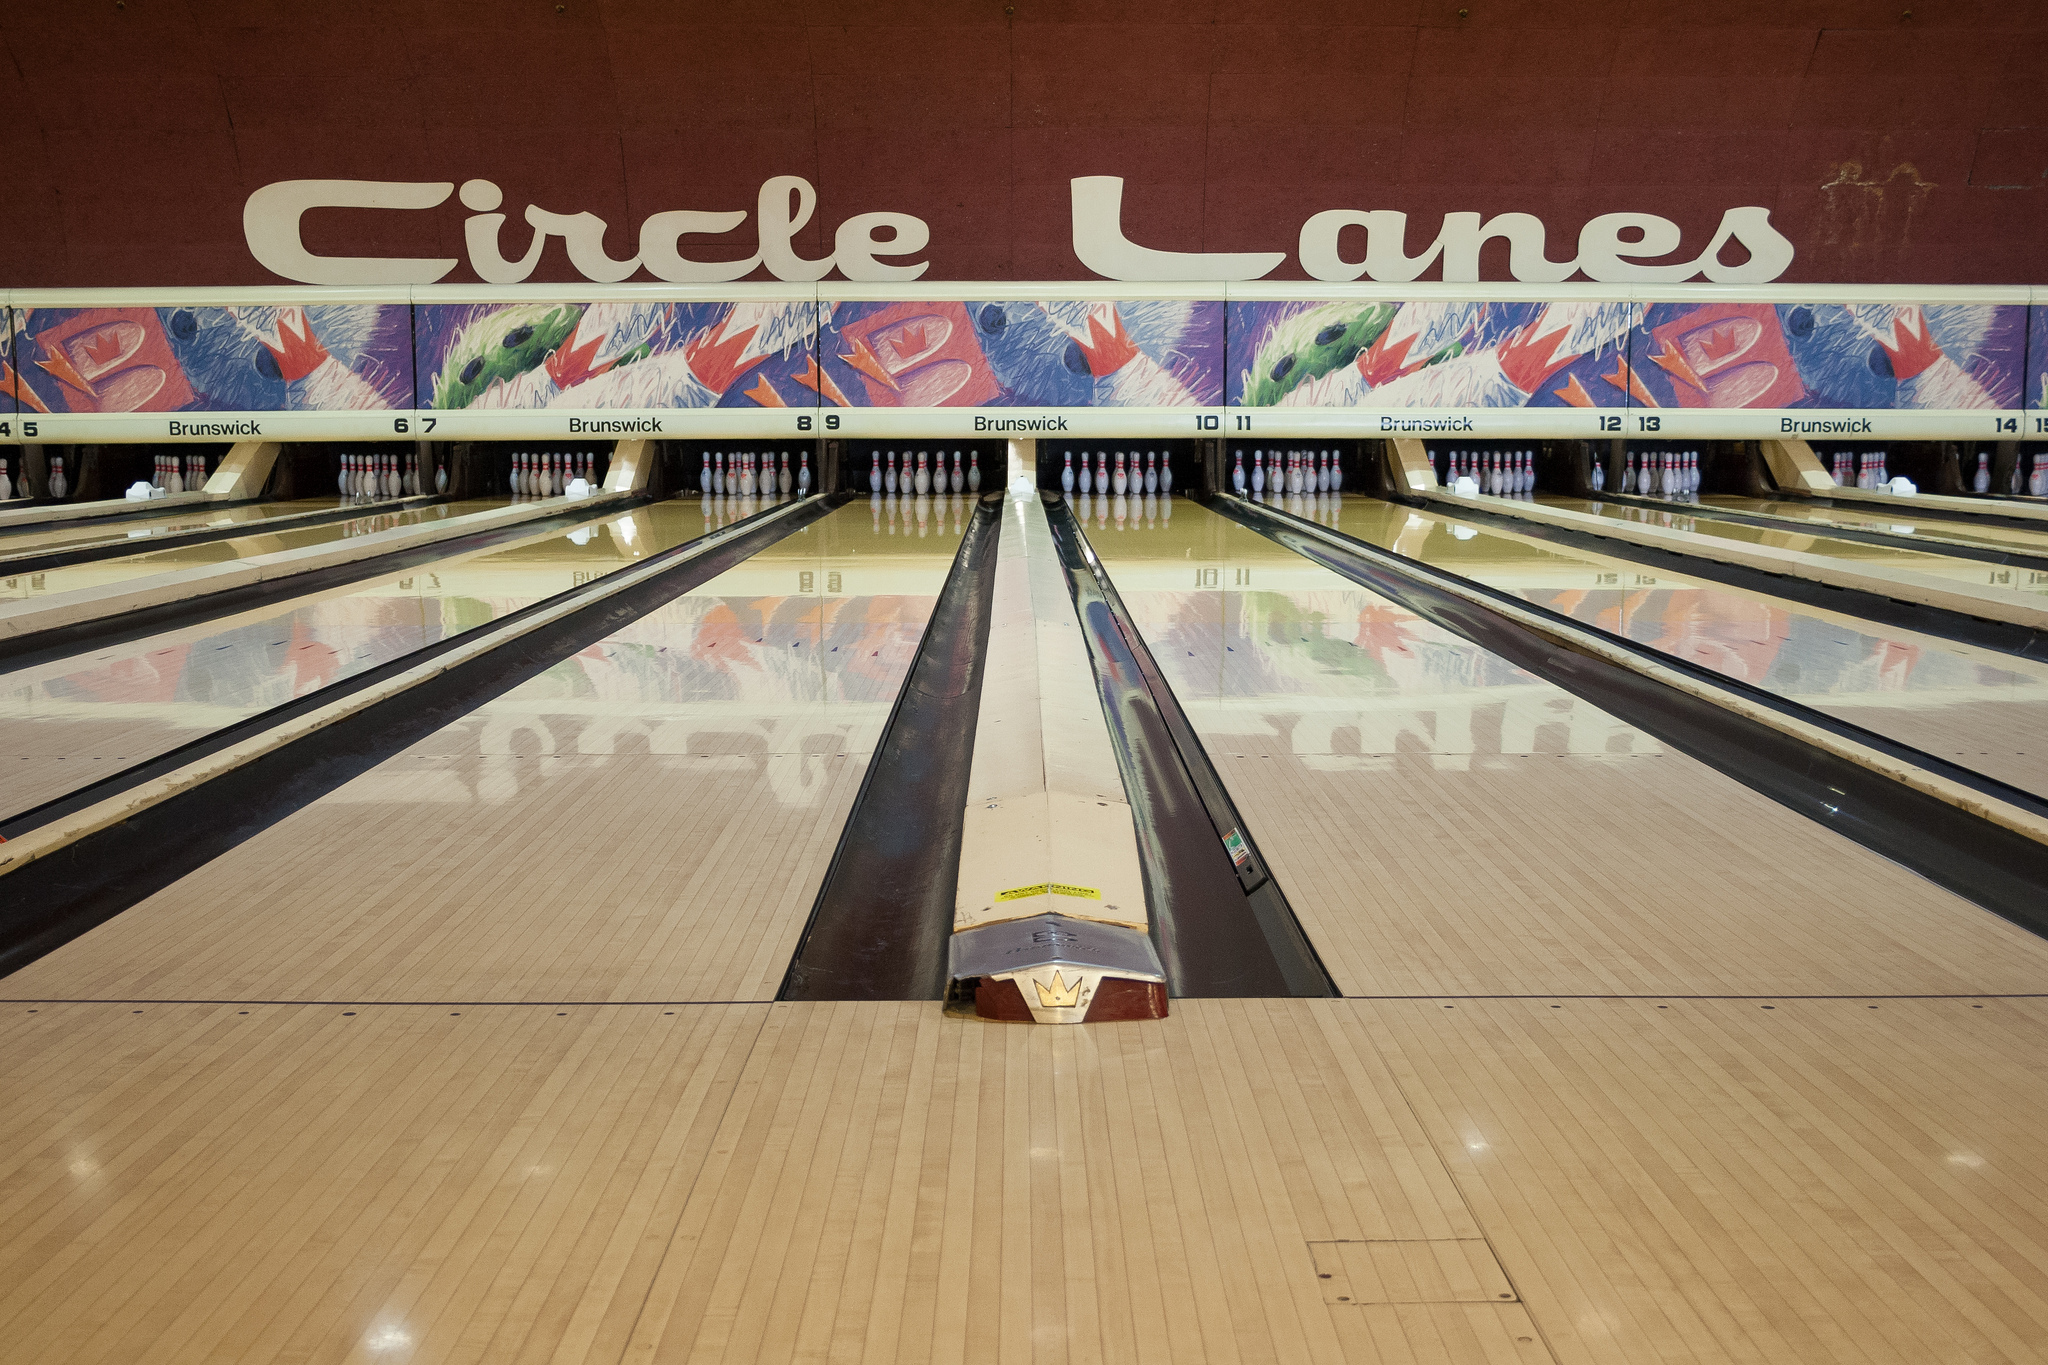 Credit "bowling" by Sera / flickr CC-BY-NC-ND